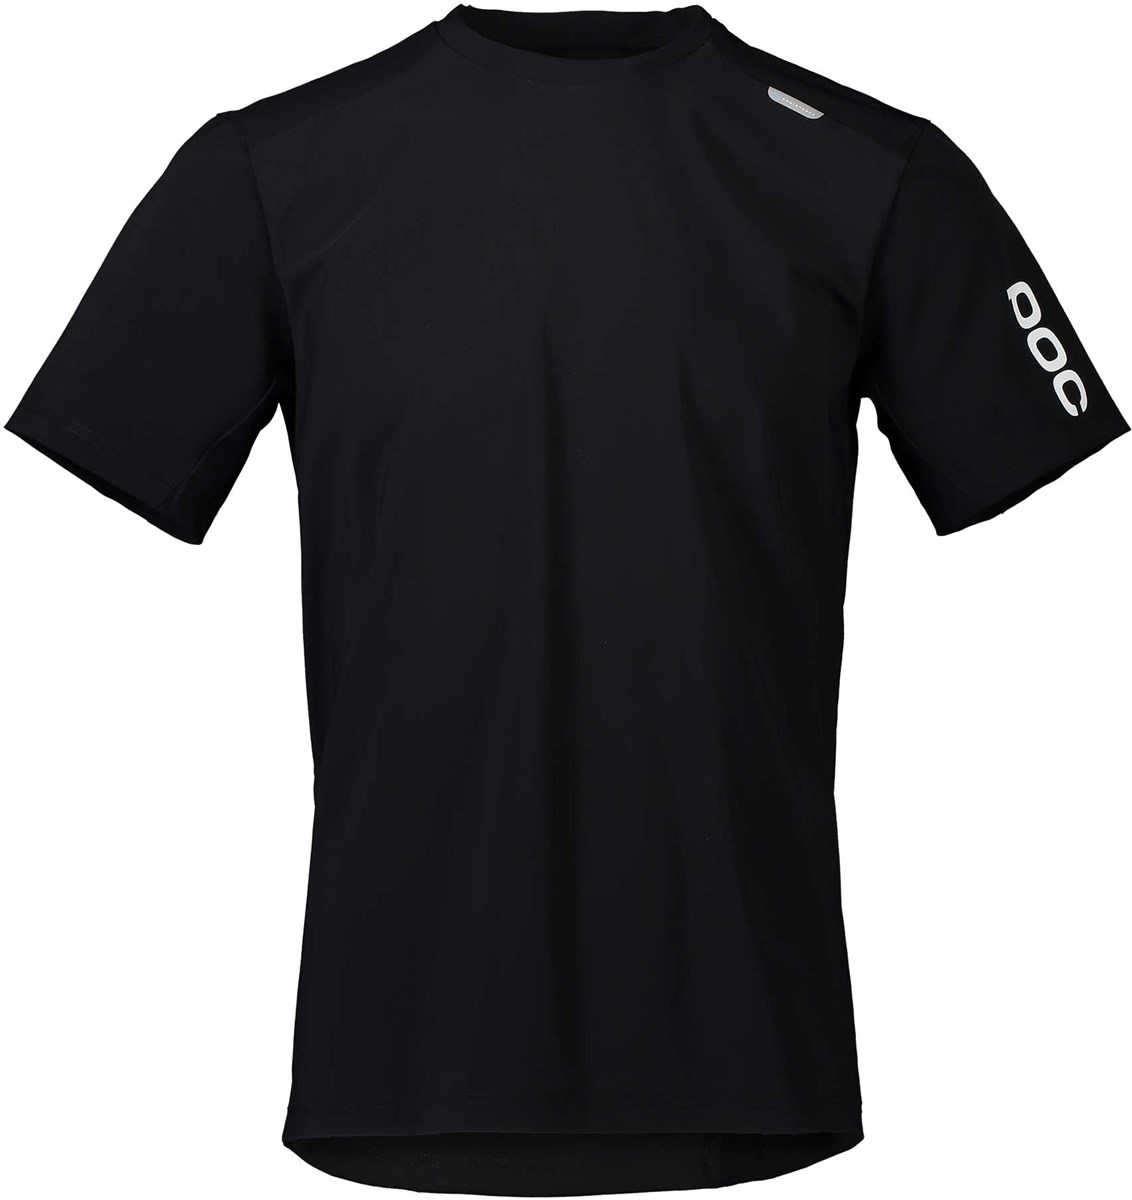 POC Resistance Ultra Short Sleeve Cycling Tee product image